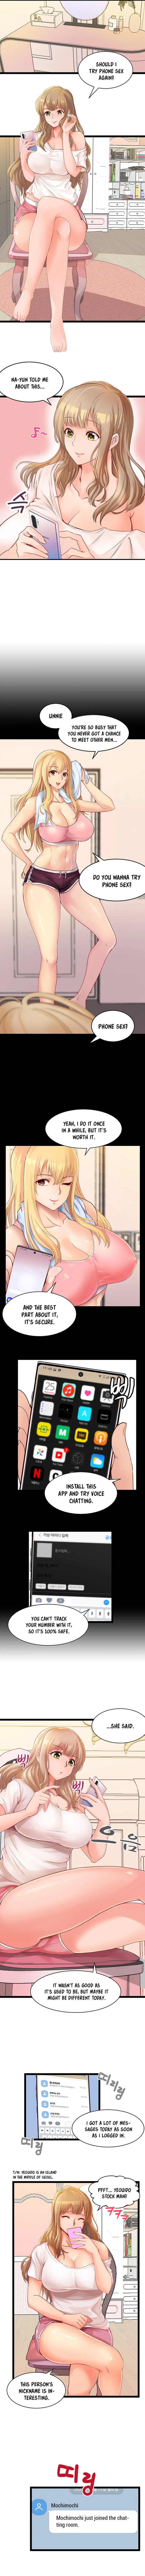 Phone Sex - Chapter 1 Page 3